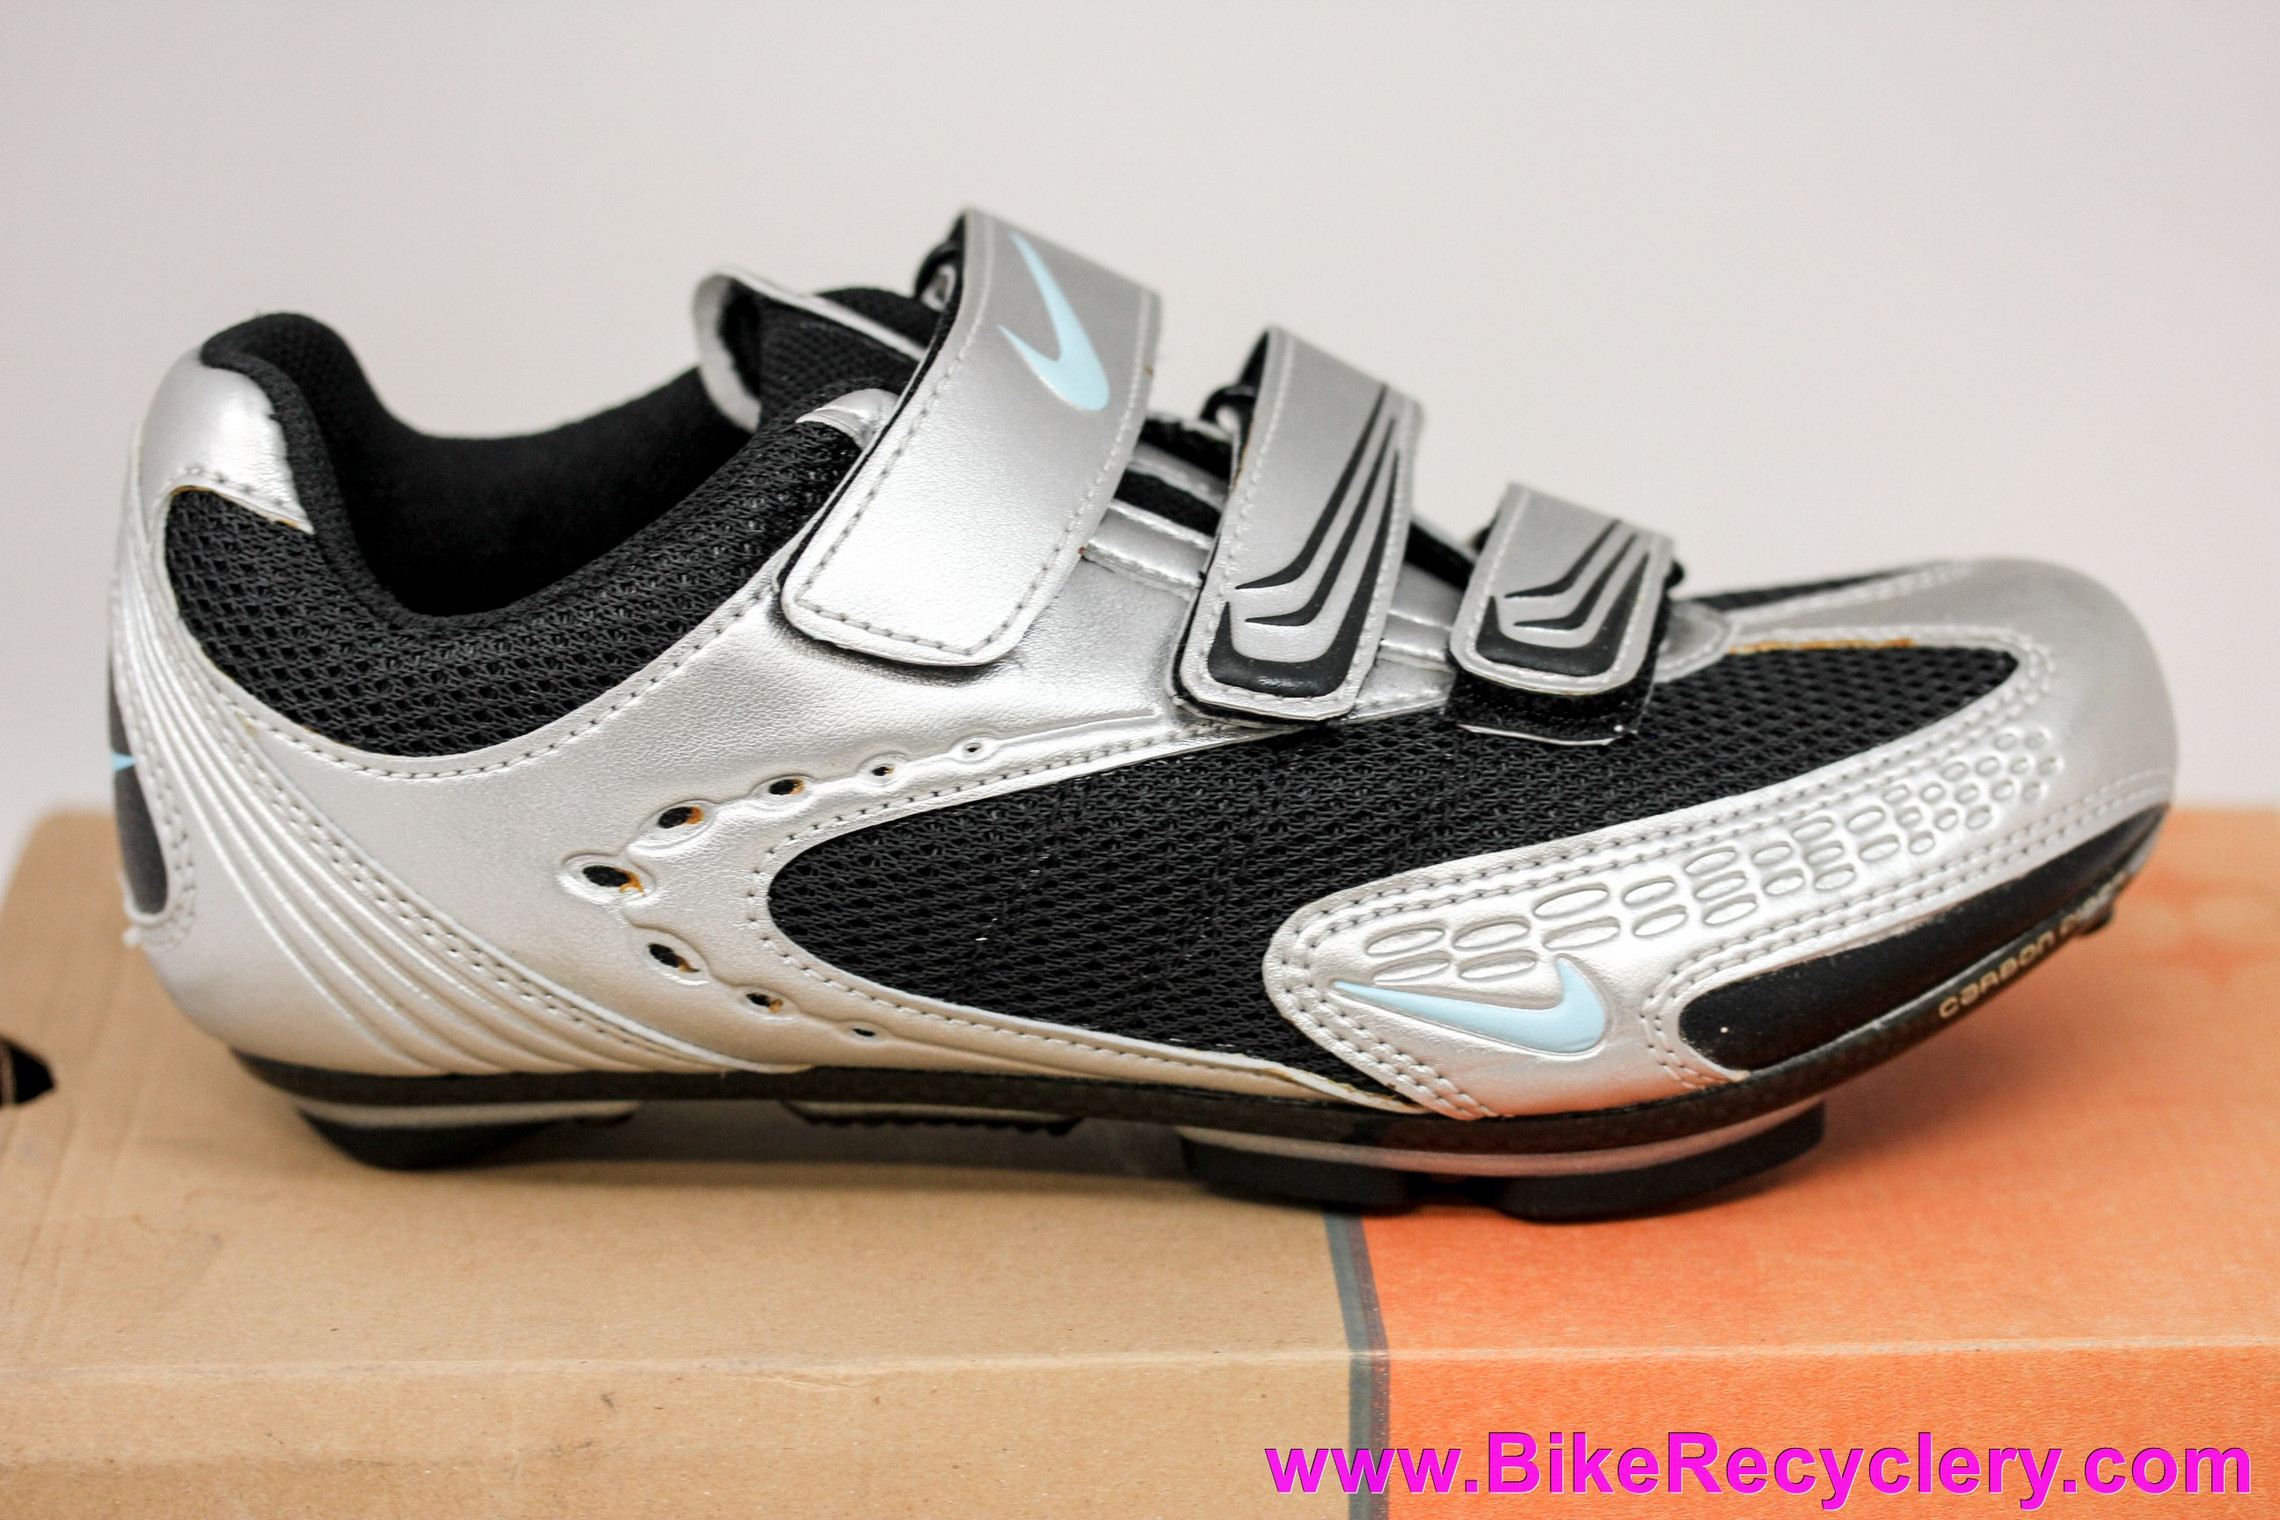 Nike Granfondo WRX Carbon Women's Road Cycling  Shoes: Size 37EU - Two & 3 Bolt Cleats - Walkable - Grey/Black (NEW w/stains)